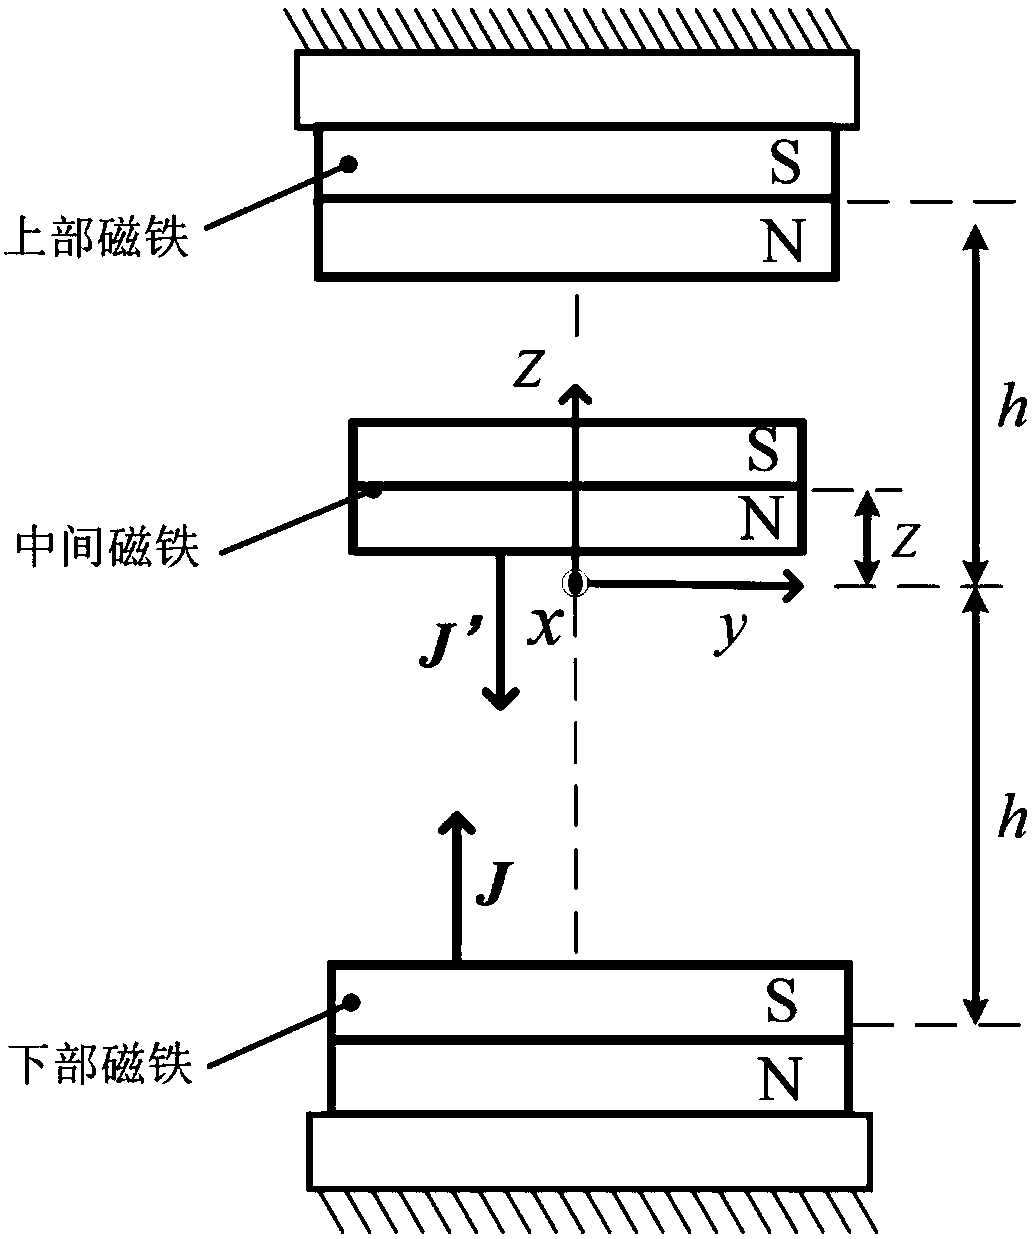 An Active-Passive Composite Vibration Isolator Using Parallel Connection of Positive and Negative Stiffnesses